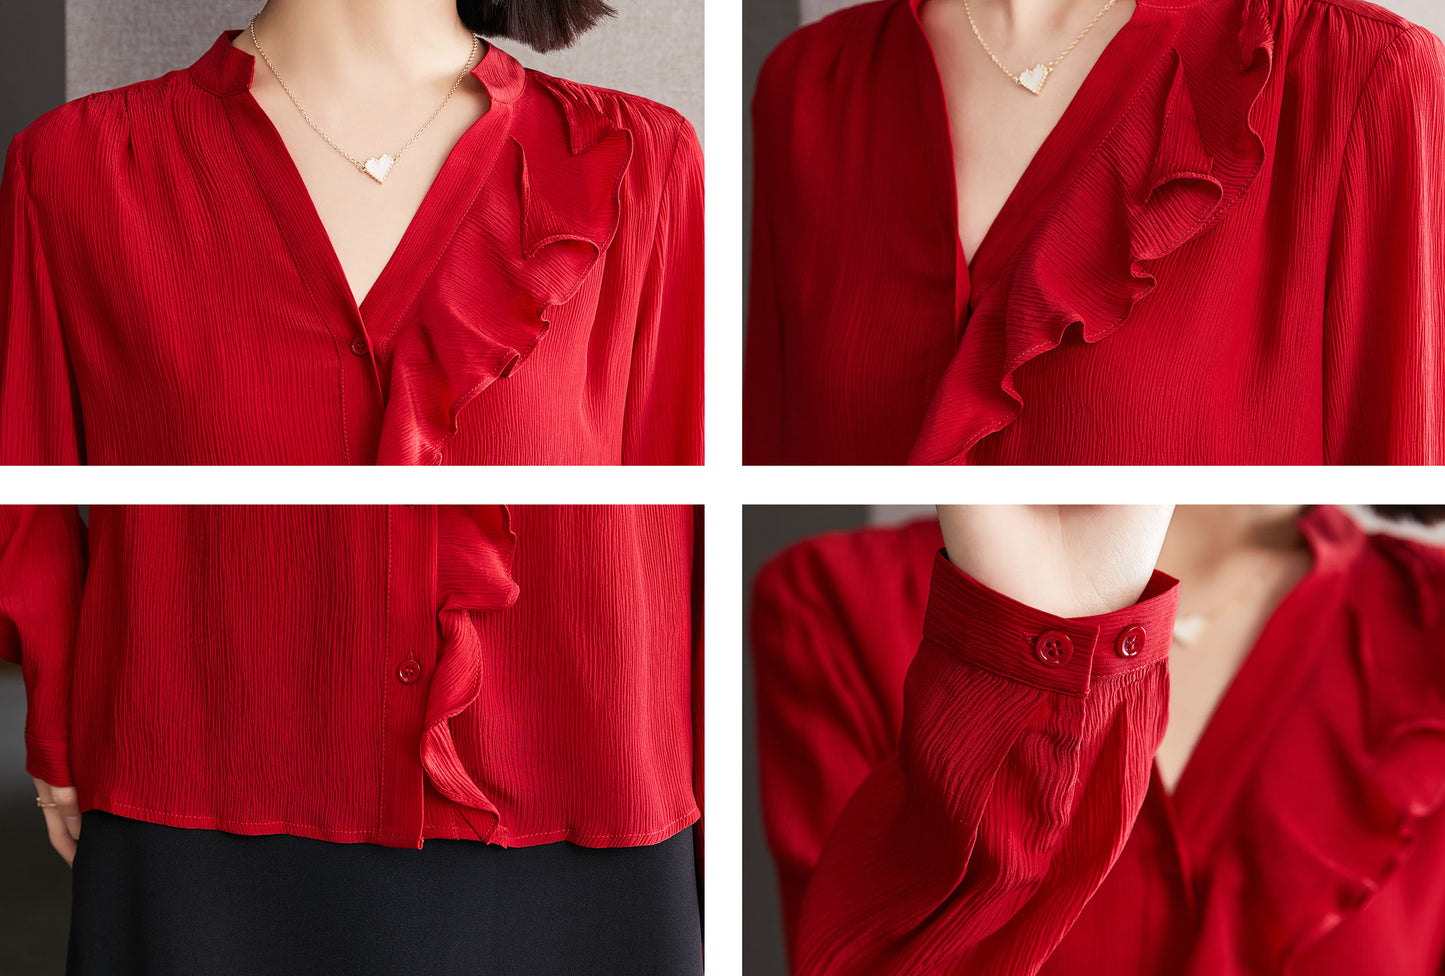 Red V-Neck Ruffle Long Sleeve Solid Blouse